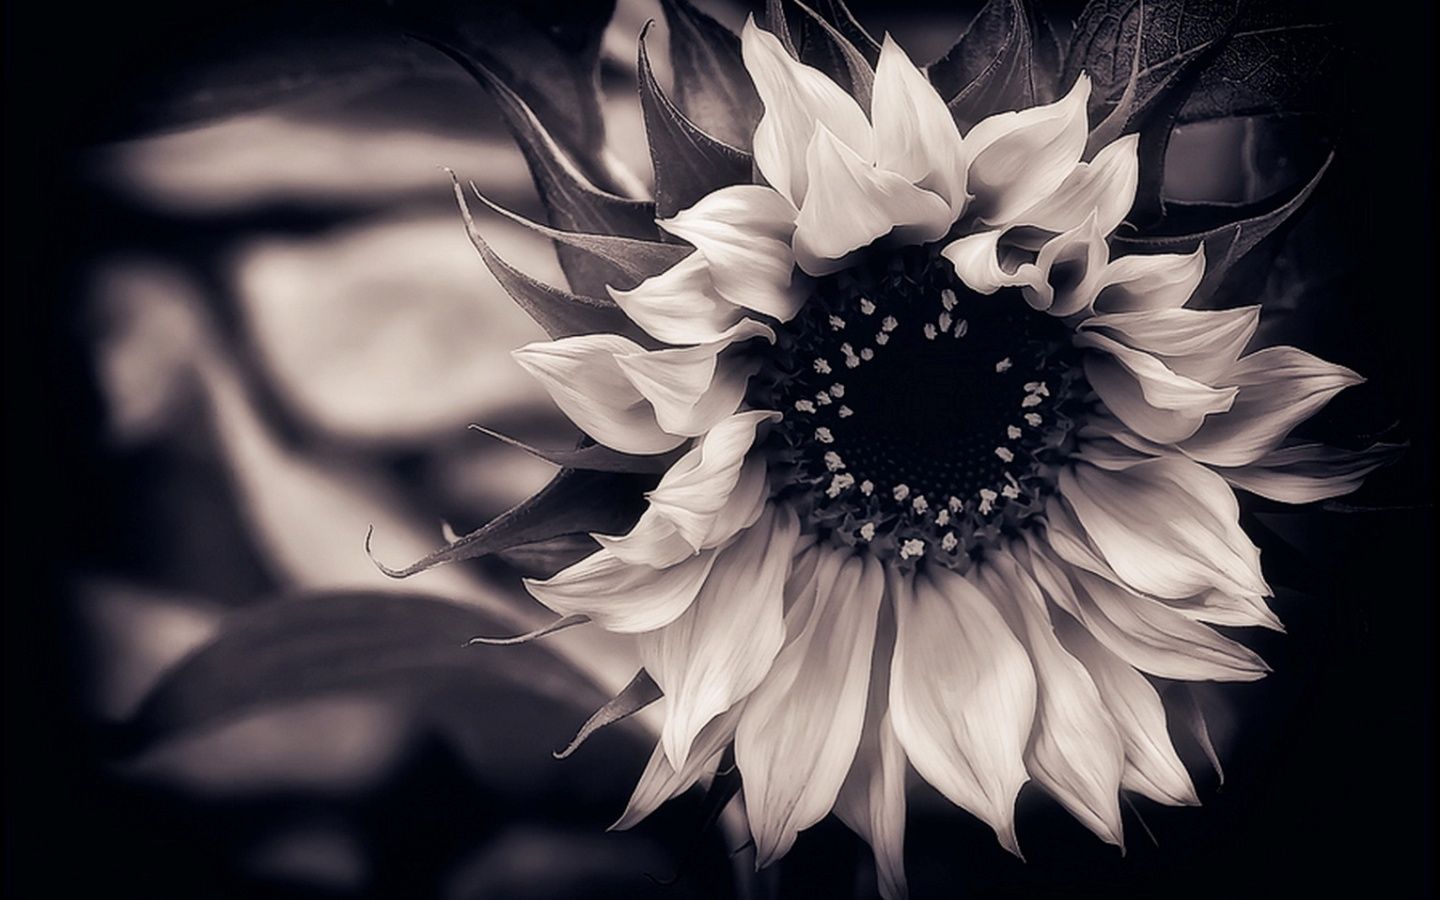 Black and White Flowers Wallpaper